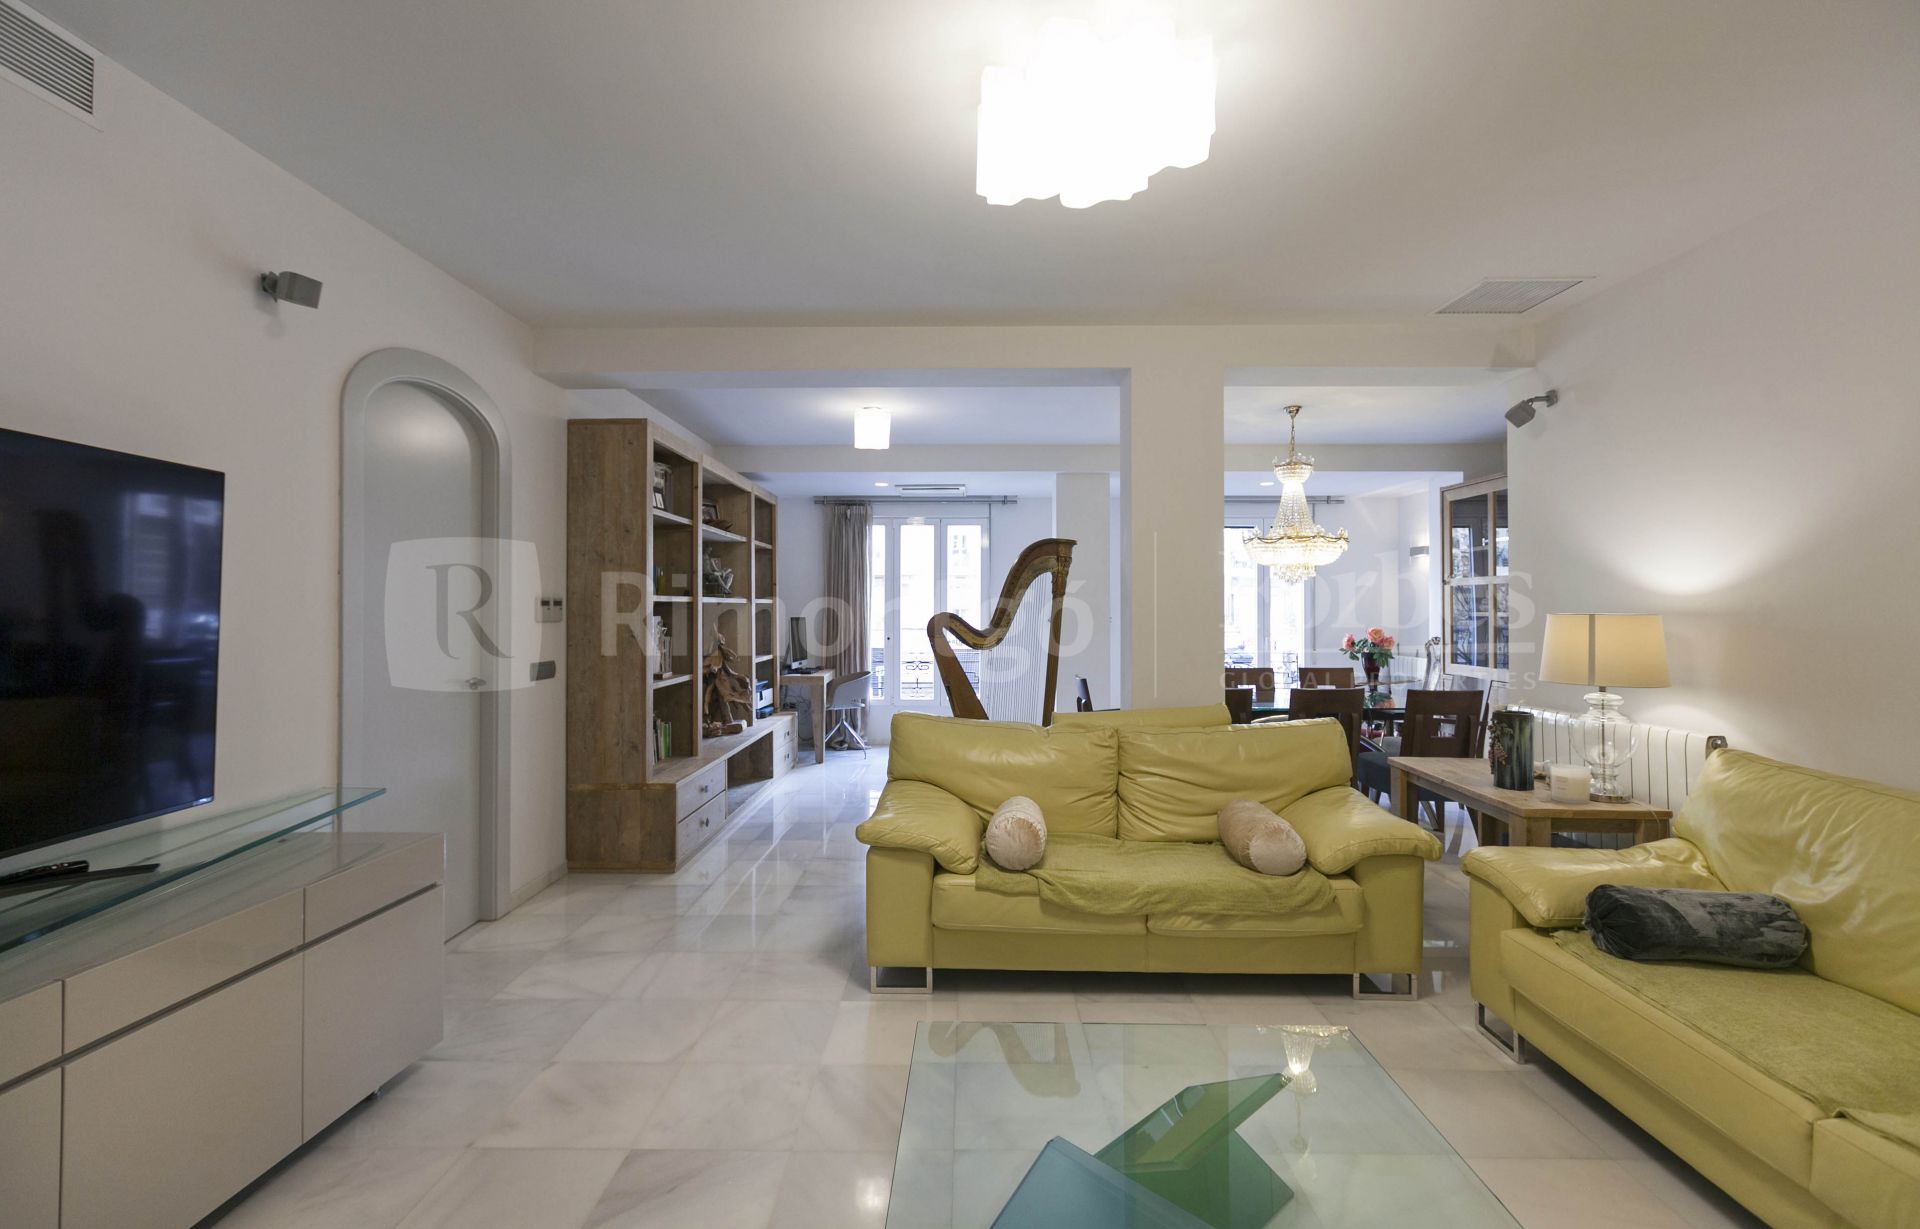 Renovated flat for sale in the Ensanche district, Valencia.